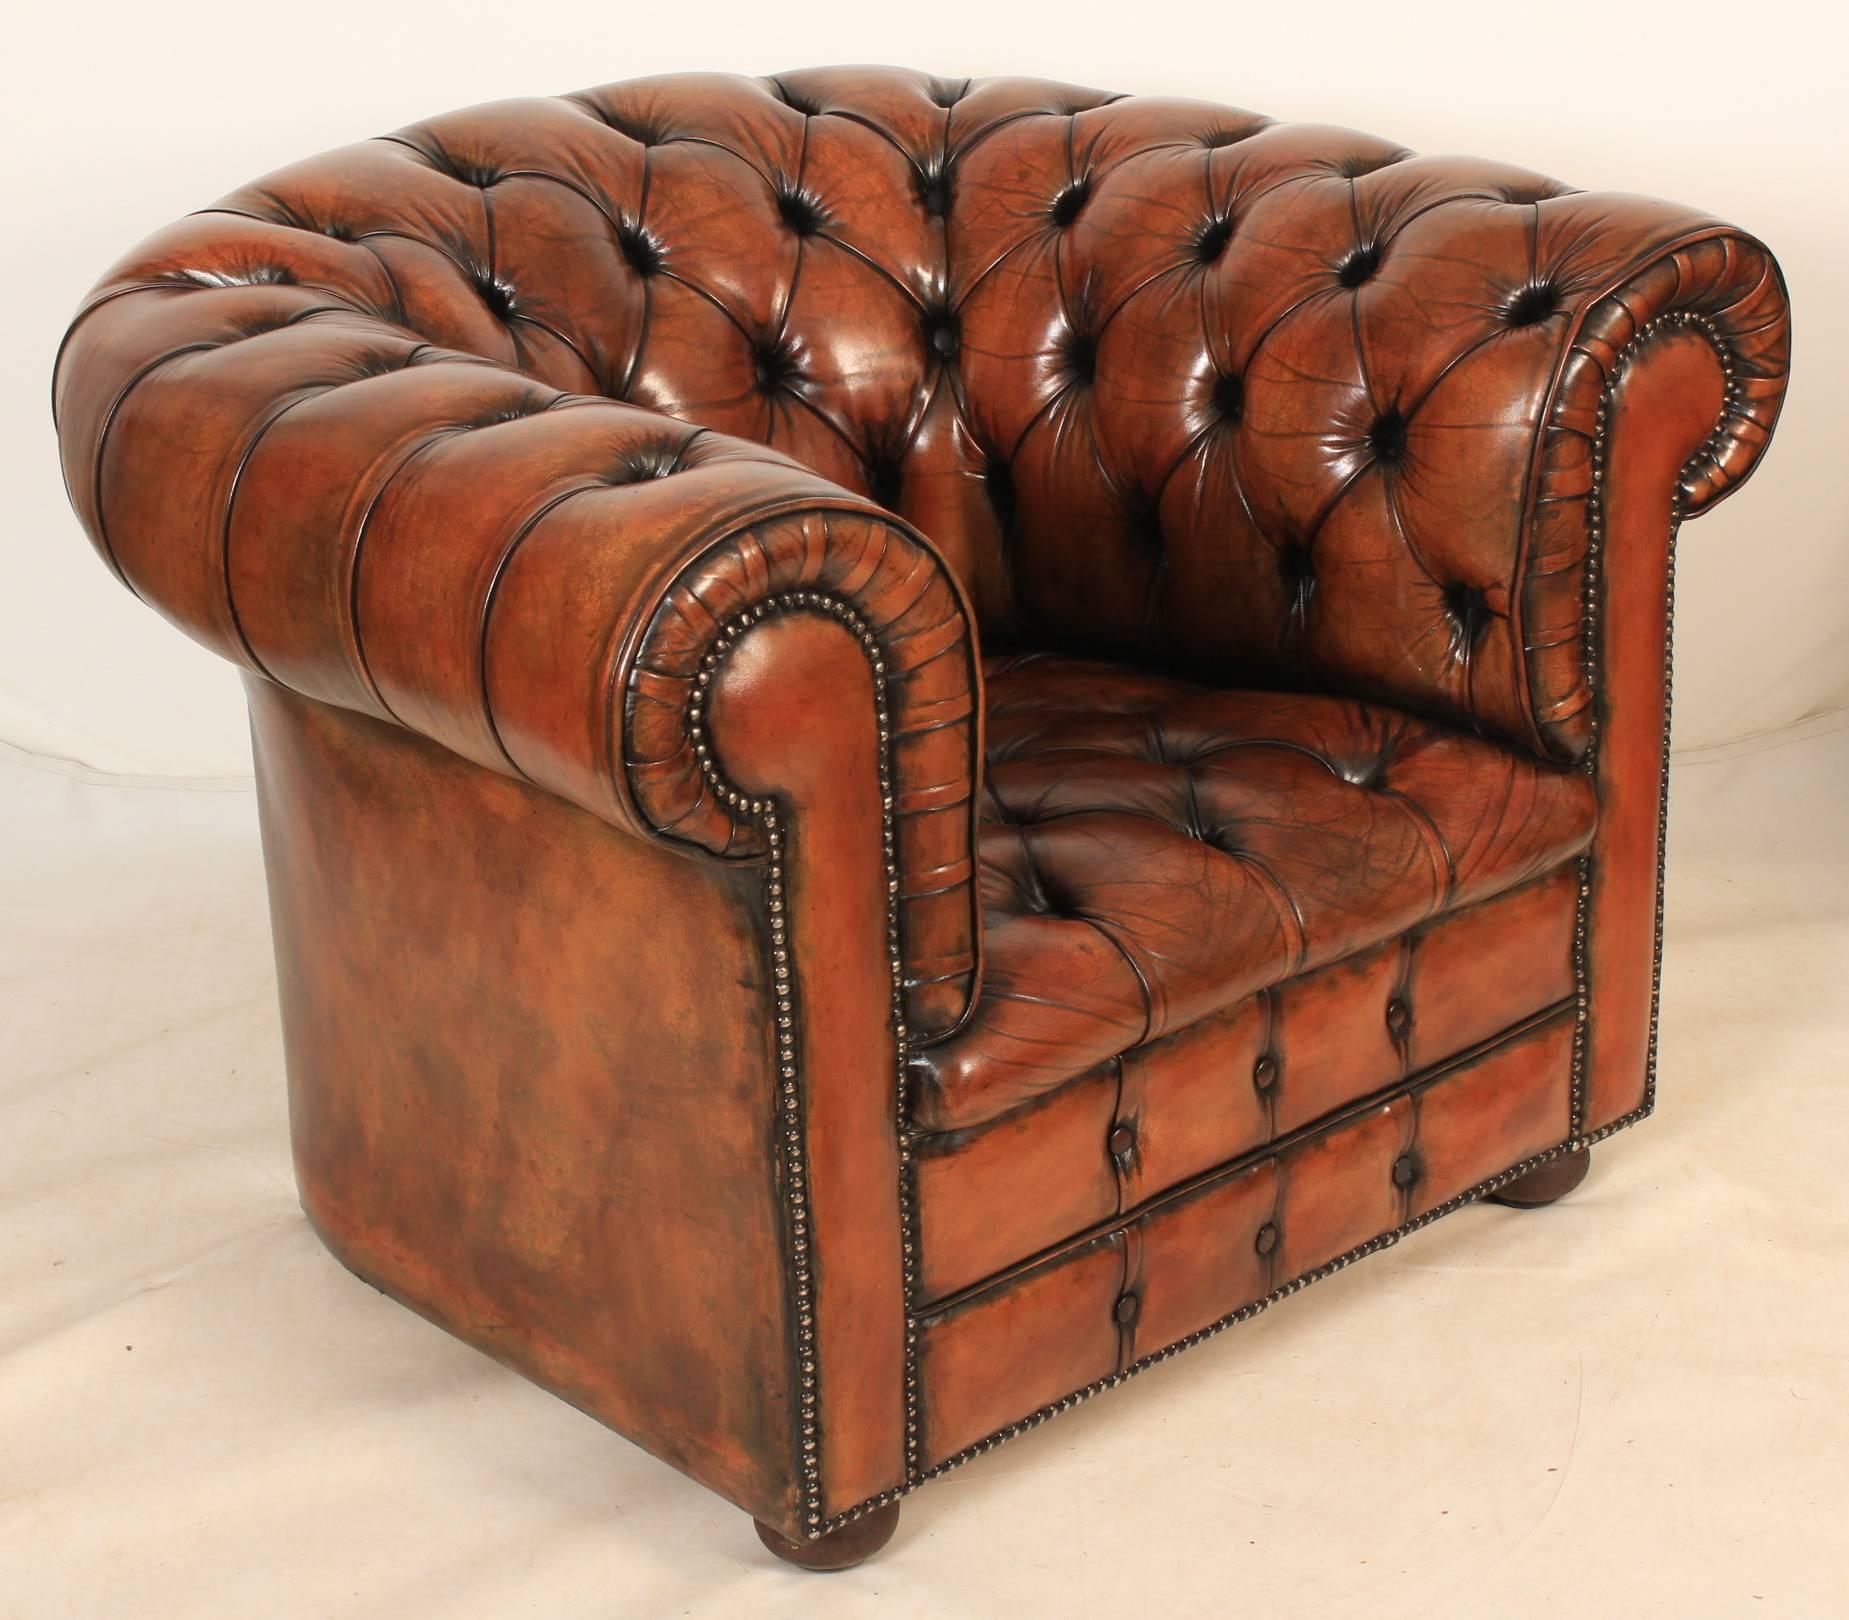 English, circa 1920.
This hand dyed brown leather Chesterfield armchair is offered in showroom condition.
It has a lovely deep buttoned back, arms and seat, with brass studded edging.
On bun feet with casters.
A lovely comfortable chair, ready